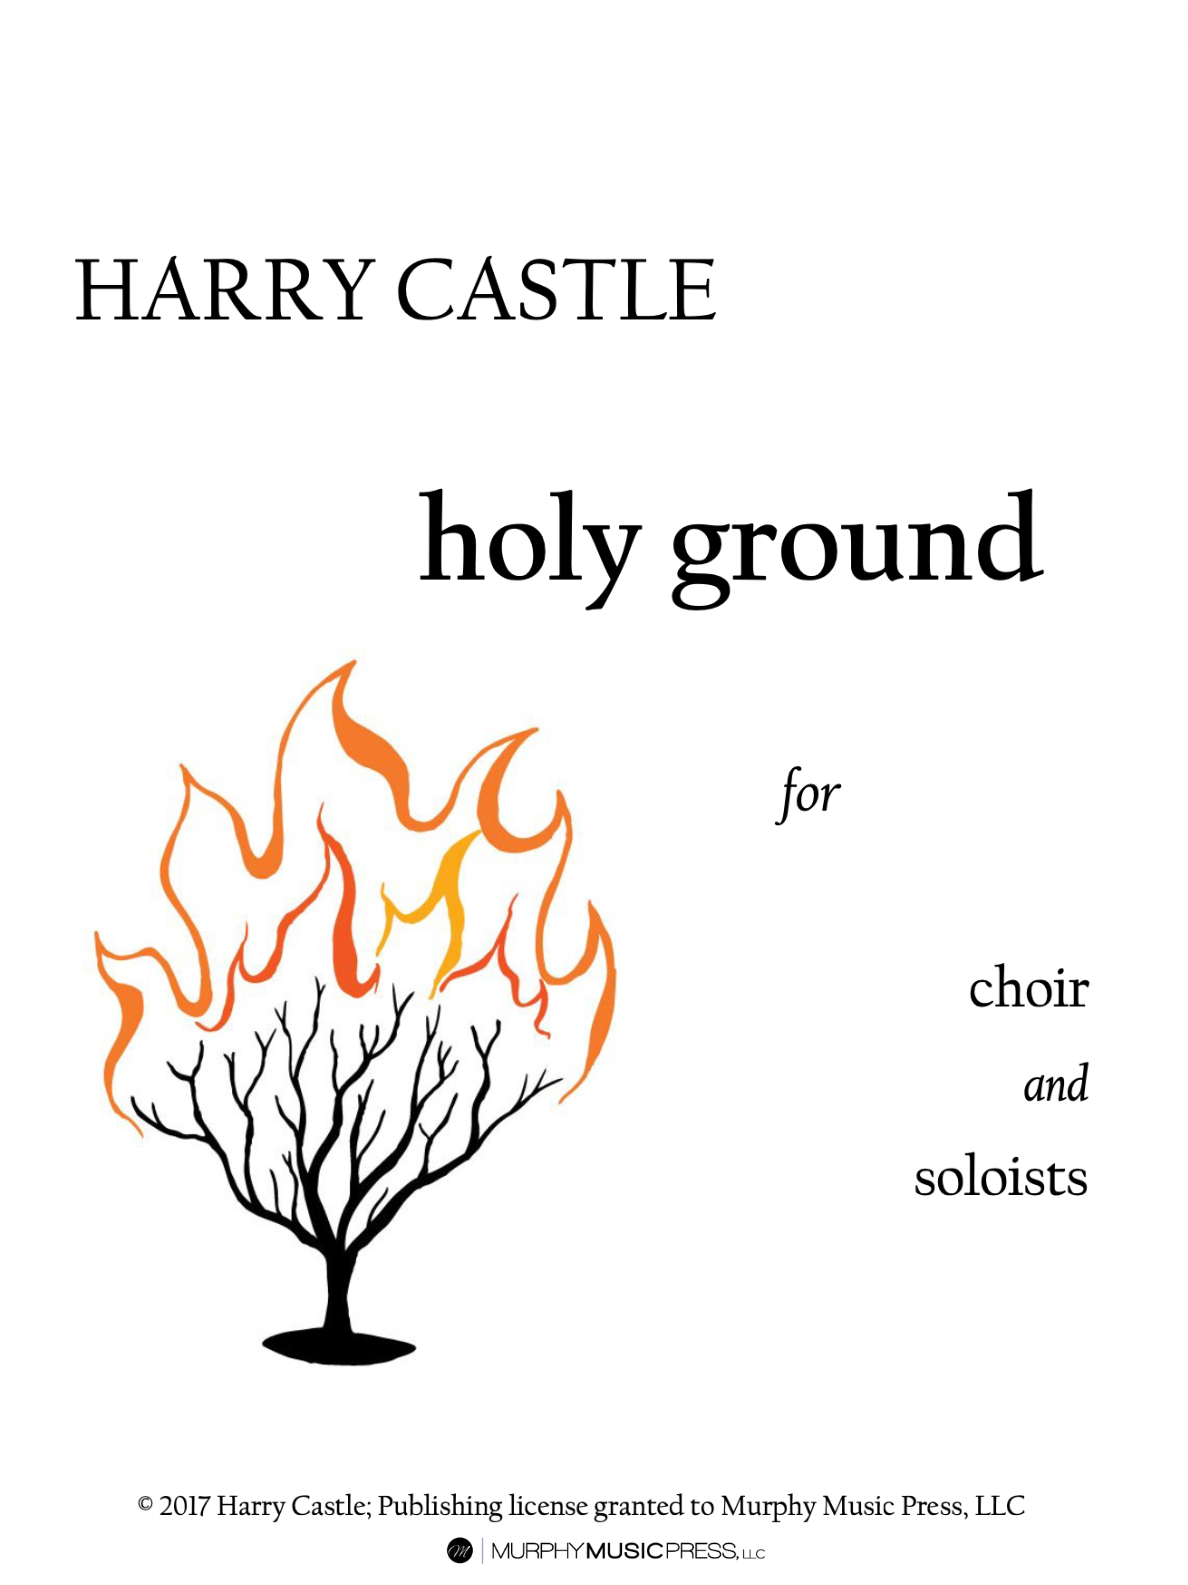 holy ground by Harry Castle